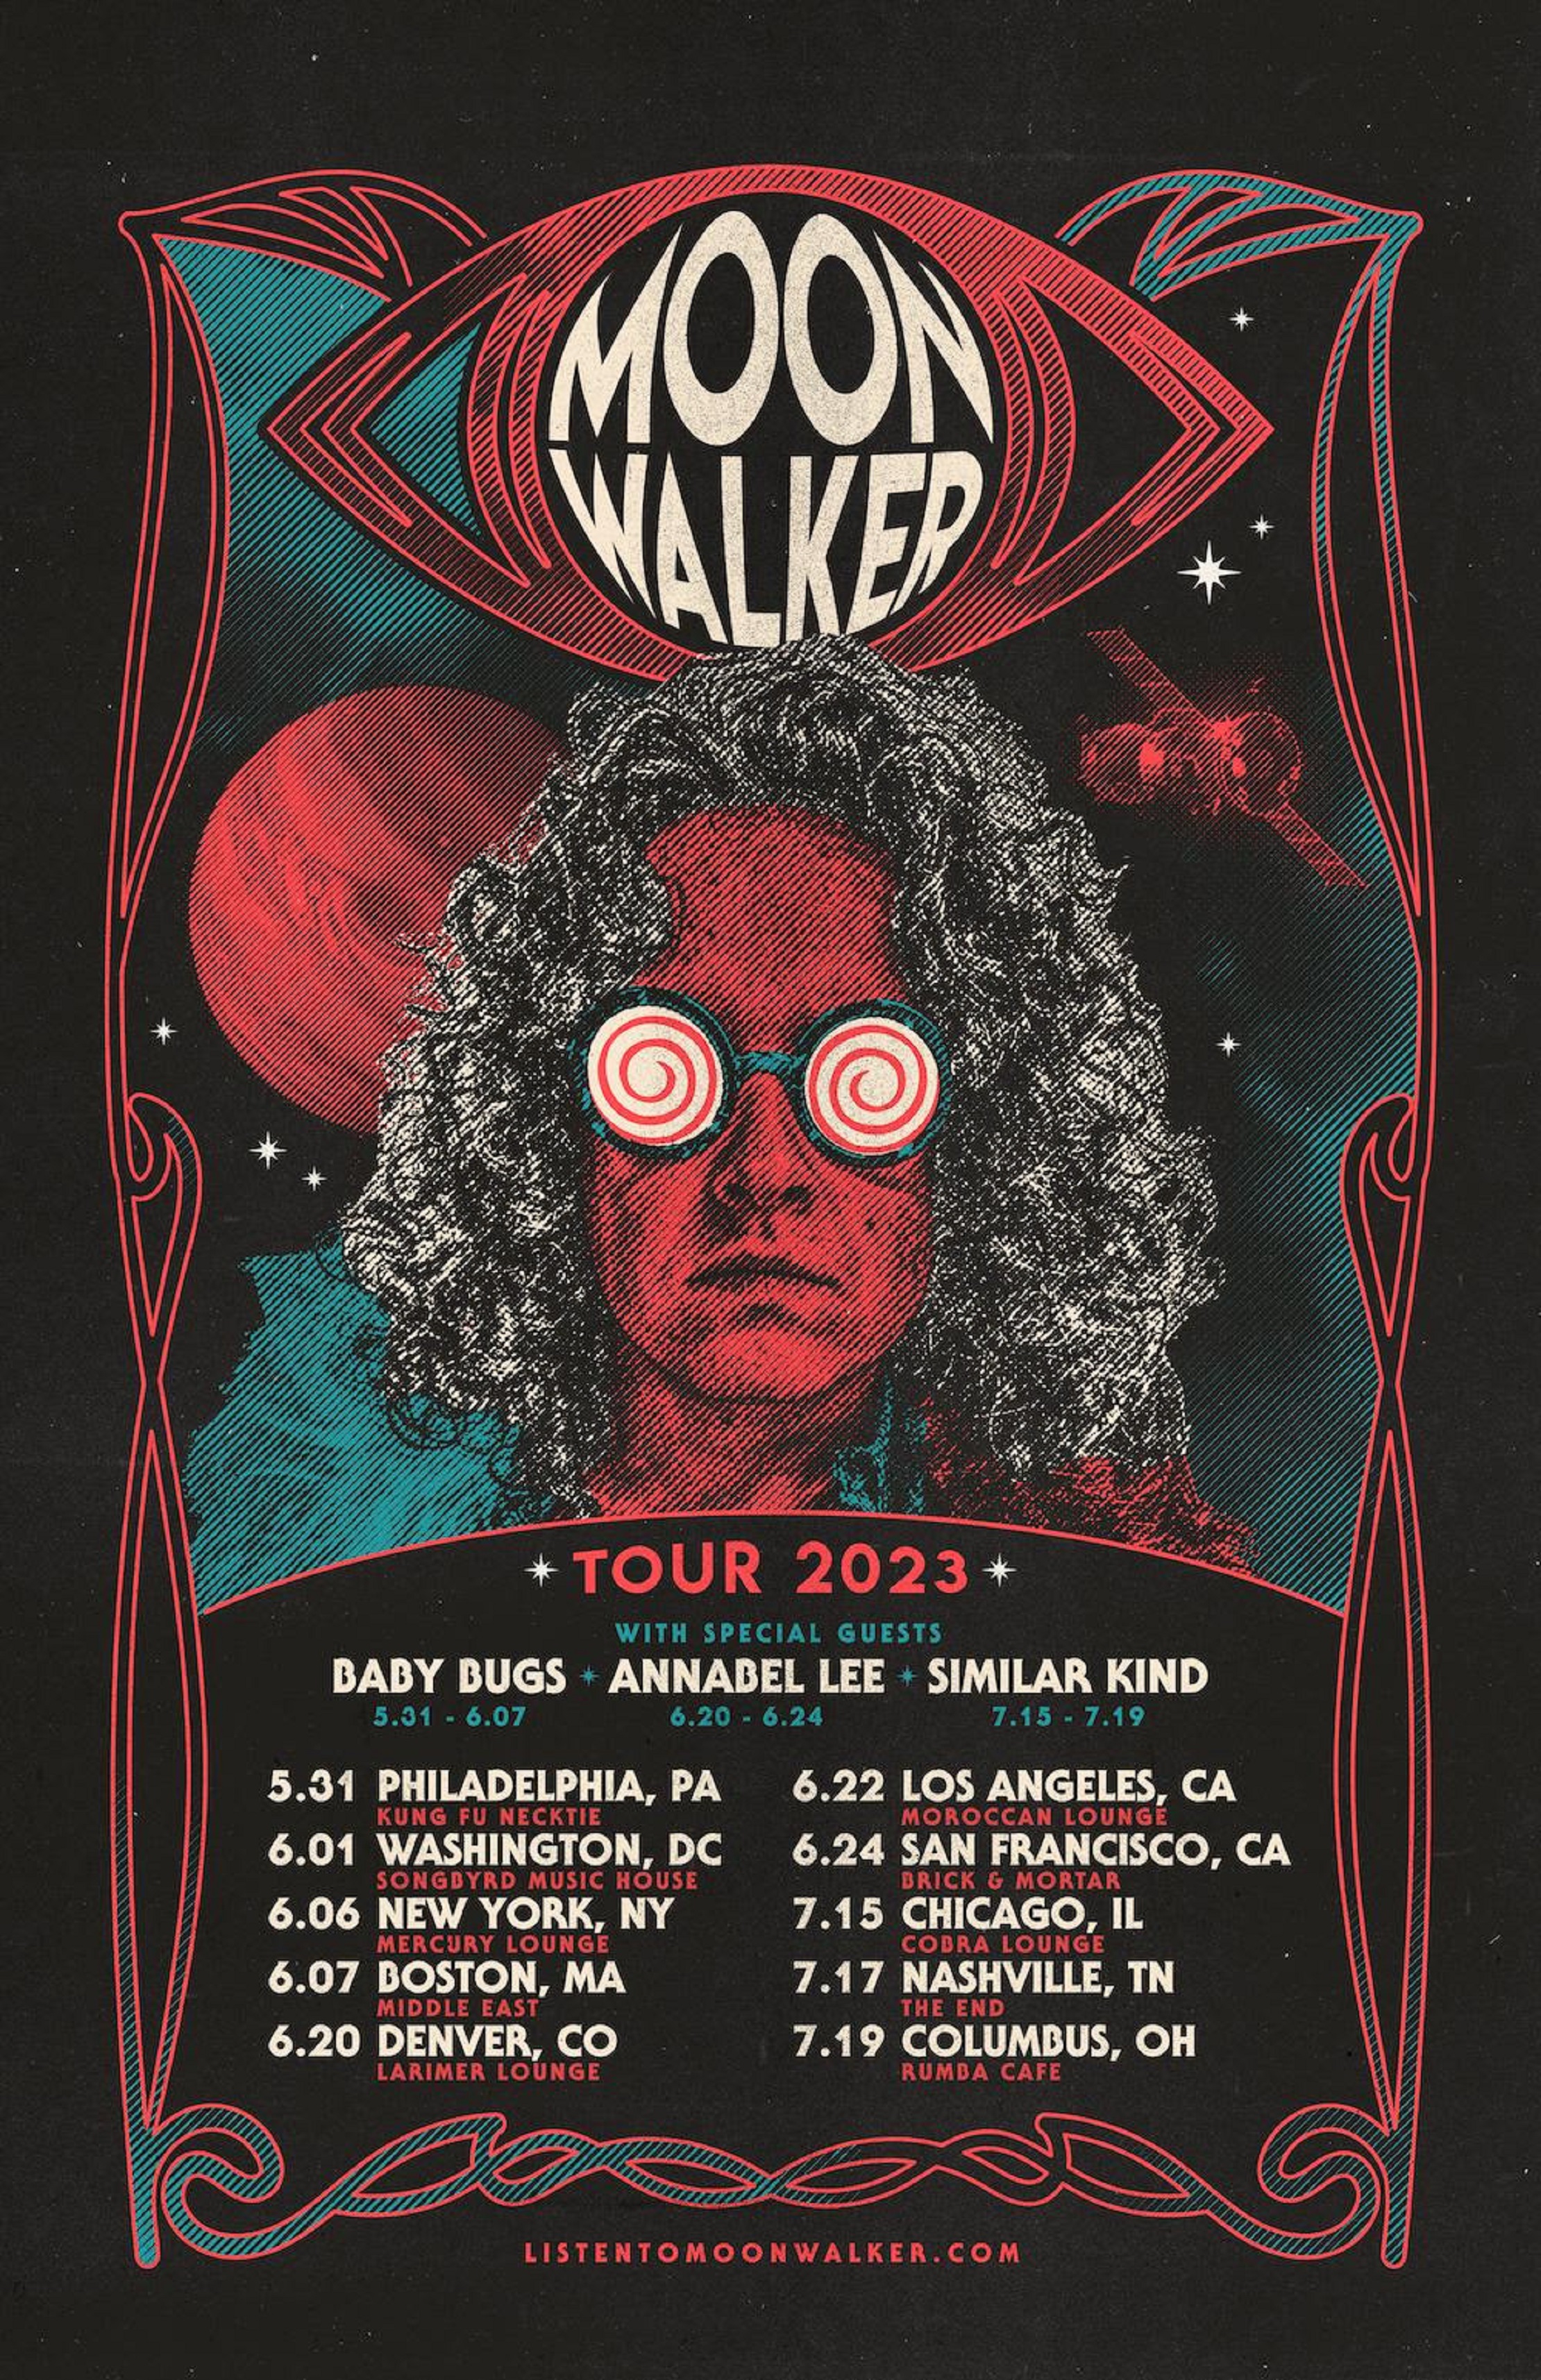 Moon Walker returns with groovy + gritty track "American Dream Come True" | Summer 2023 tour